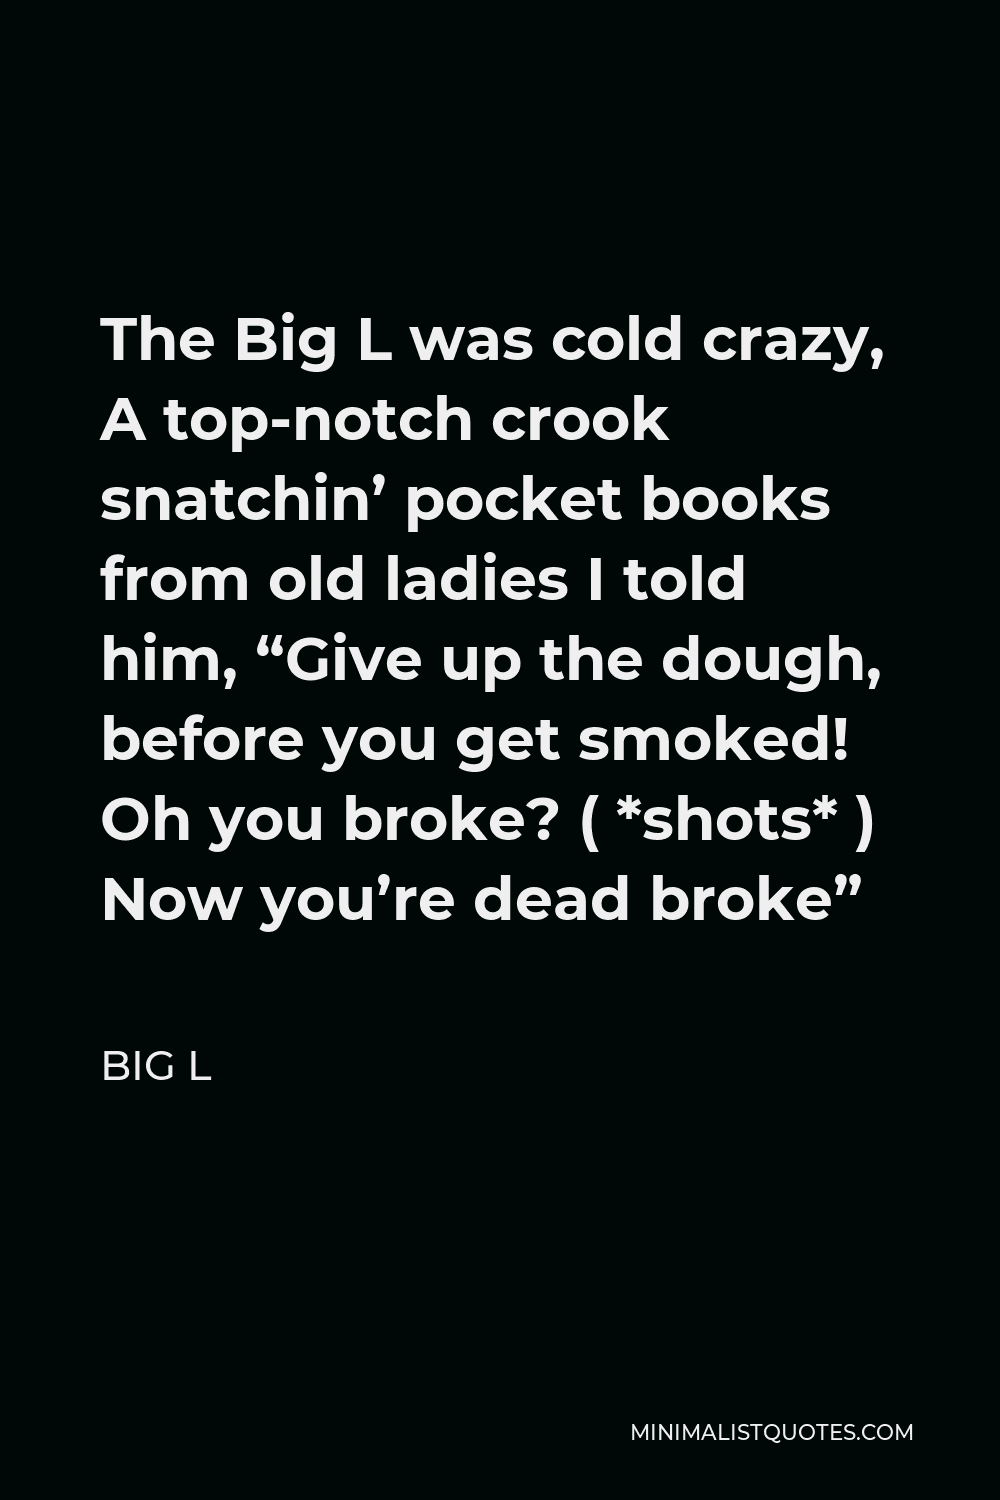 Big L Quote - The Big L was cold crazy, A top-notch crook snatchin pocket books from old ladies